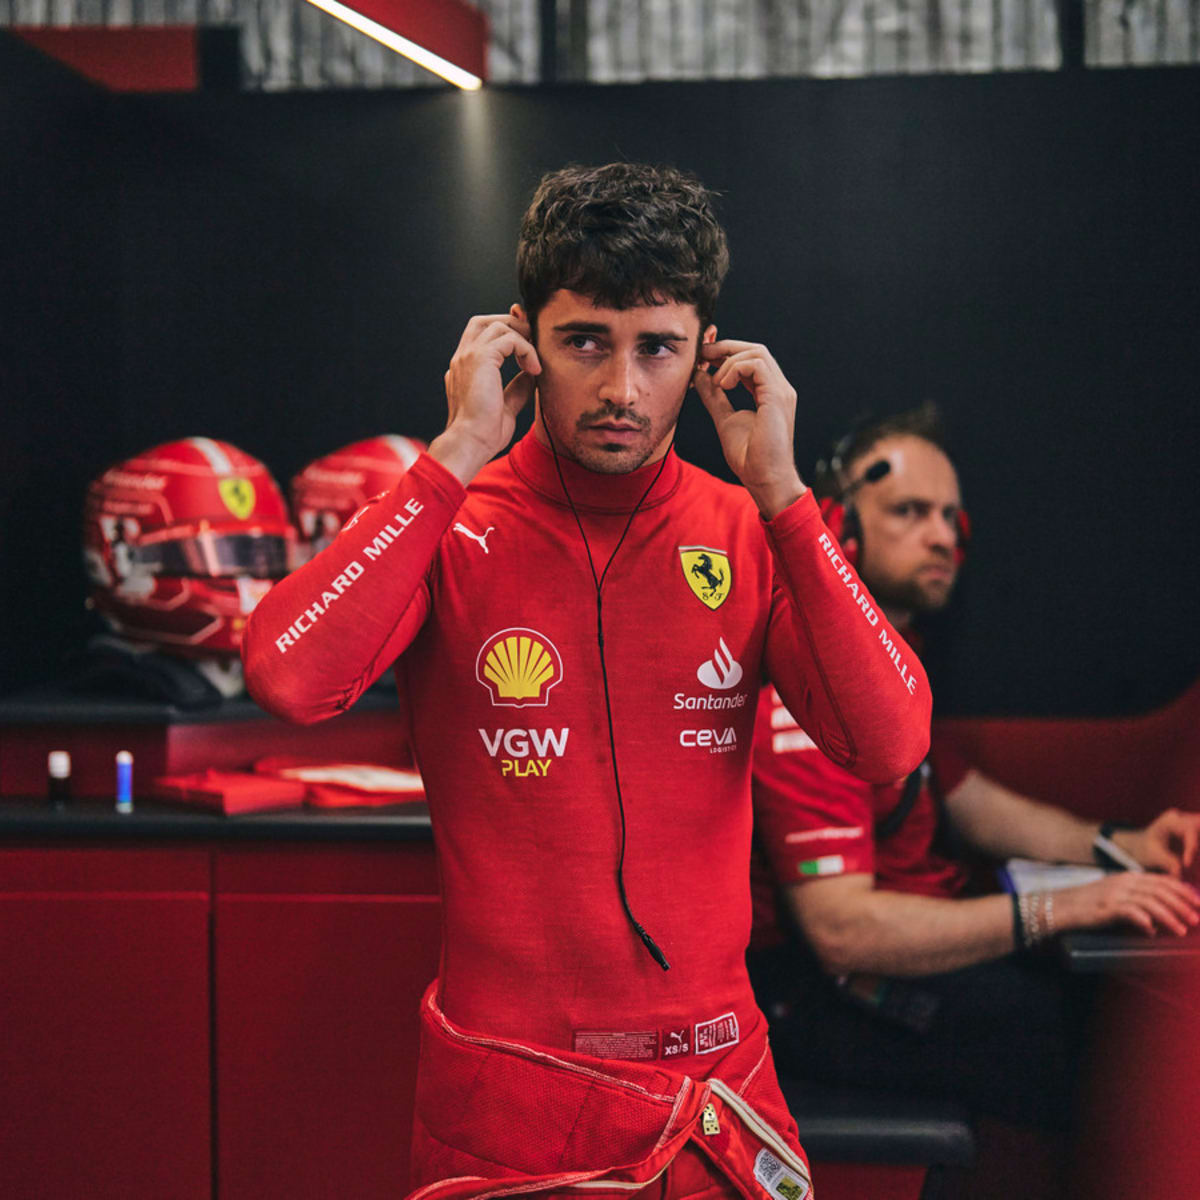 Charles Leclerc to start the 2023 Spanish Grand Prix from pit lane